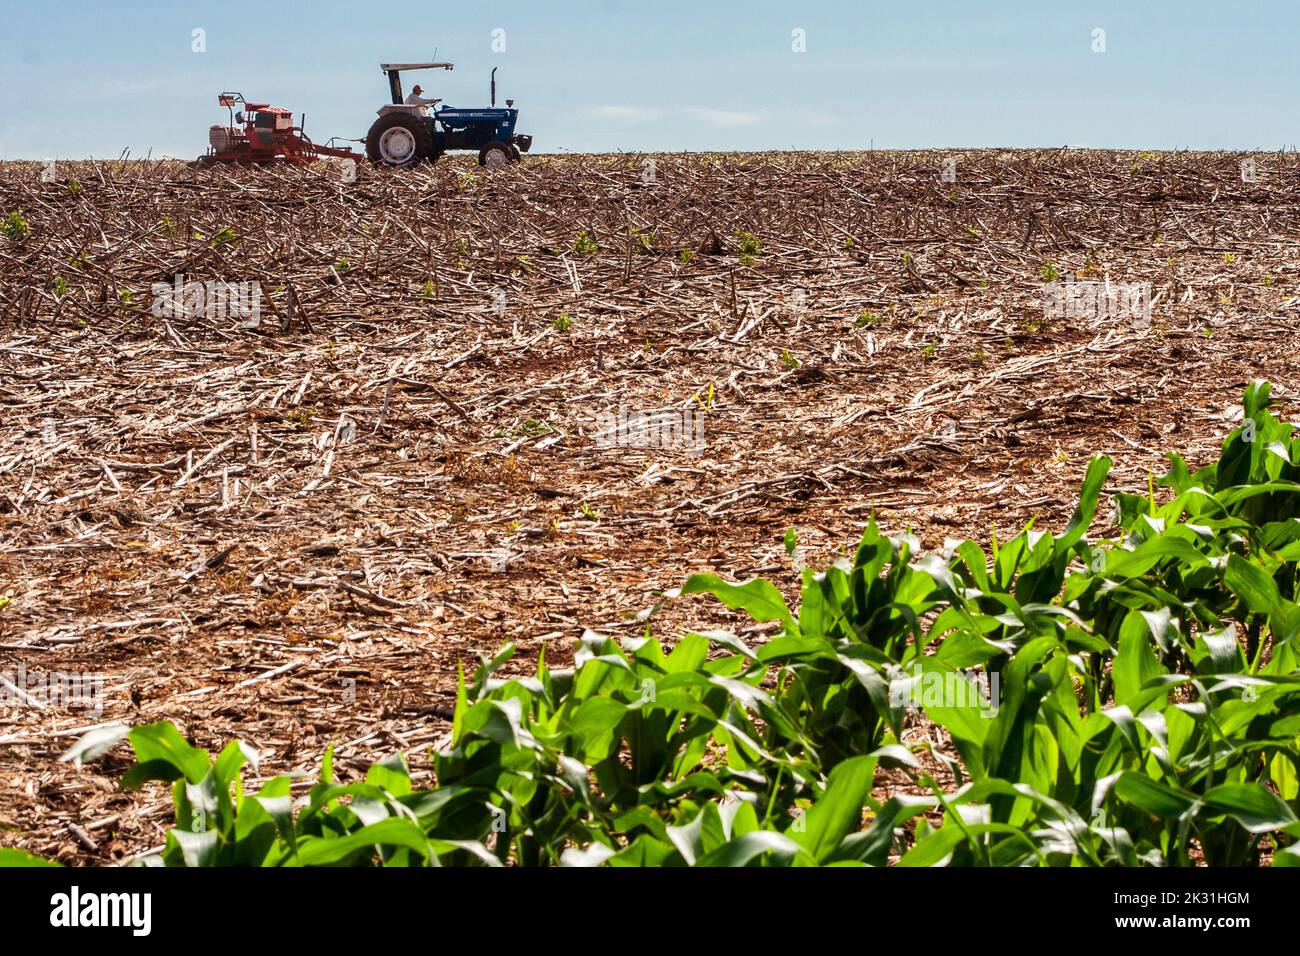 Parana, Brazil, October 28, 2009. Farmer in tractor sowing crops at field with seed scattering agricultural machine Stock Photo